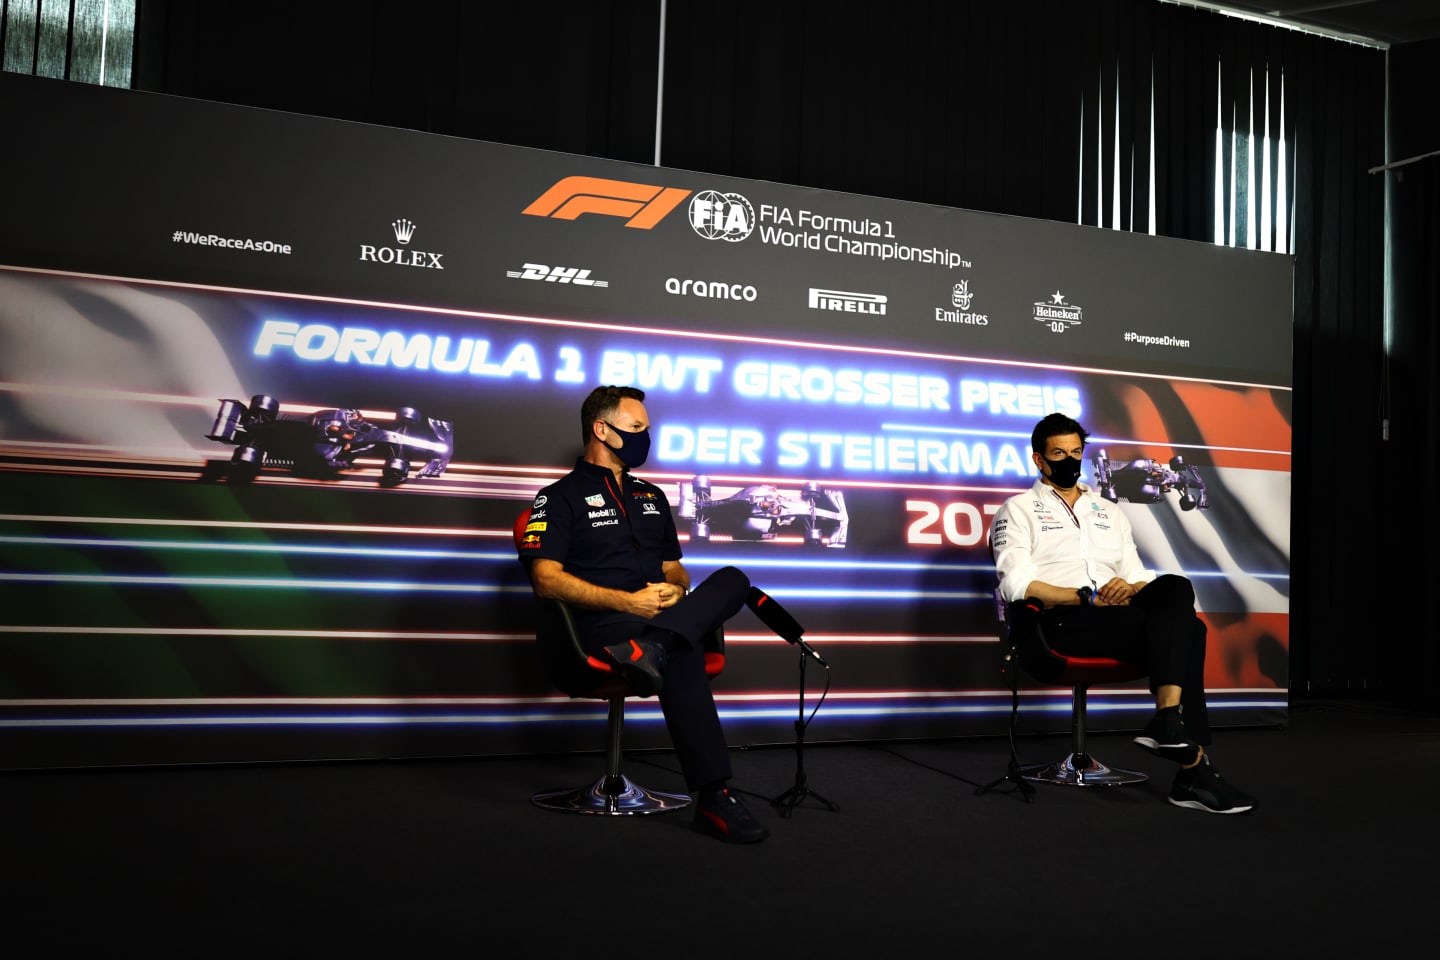 SPIELBERG, AUSTRIA - JUNE 25: Red Bull Racing Team Principal Christian Horner and Mercedes GP Executive Director Toto Wolff talk in a press conference  during practice ahead of the F1 Grand Prix of Styria at Red Bull Ring on June 25, 2021 in Spielberg, Austria. (Photo by Bryn Lennon/Getty Images)